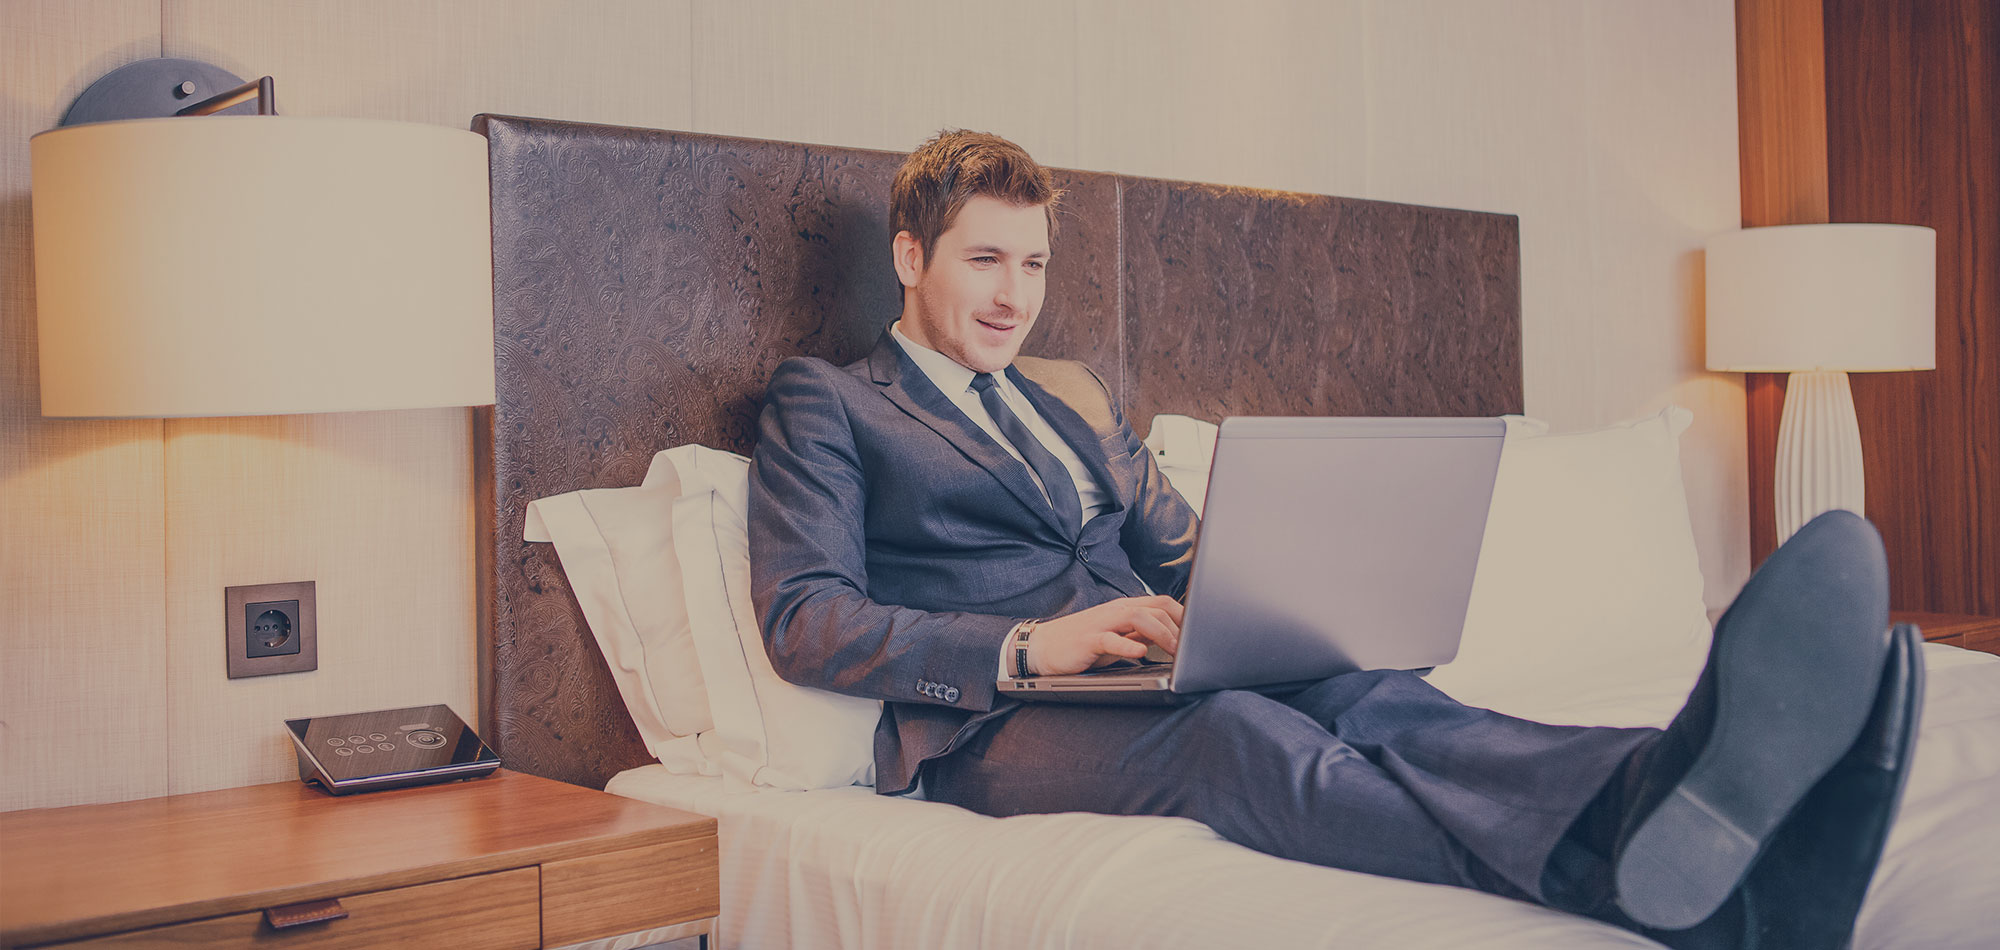 Hospitality WLAN Design: What Guests Want and Expect During Their Stay